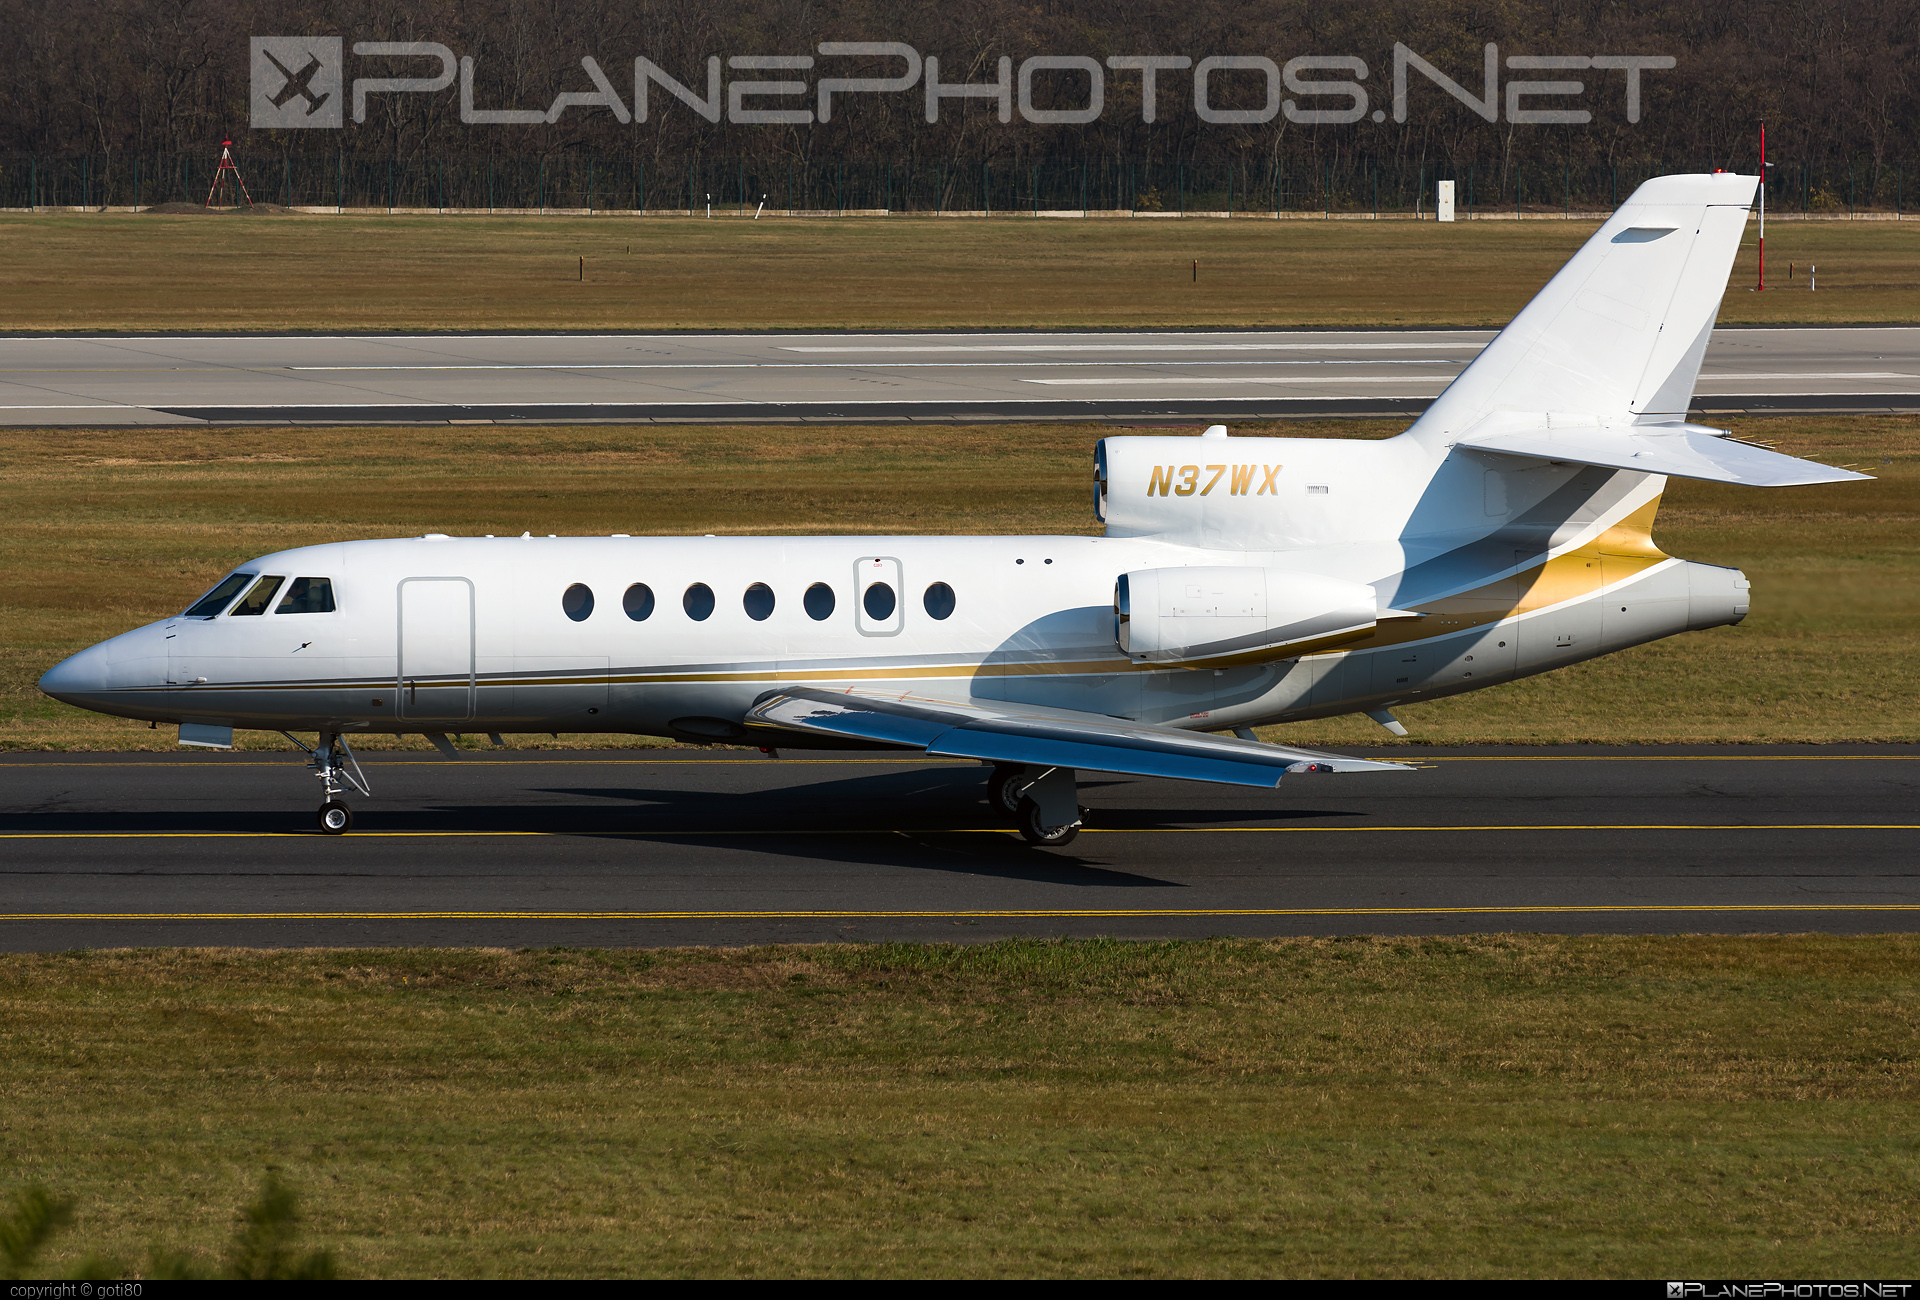 Dassault Falcon 50EX - N37WX operated by Private operator #dassault #dassaultFalcon #dassaultFalcon50 #dassaultFalcon50ex #falcon50 #falcon50ex